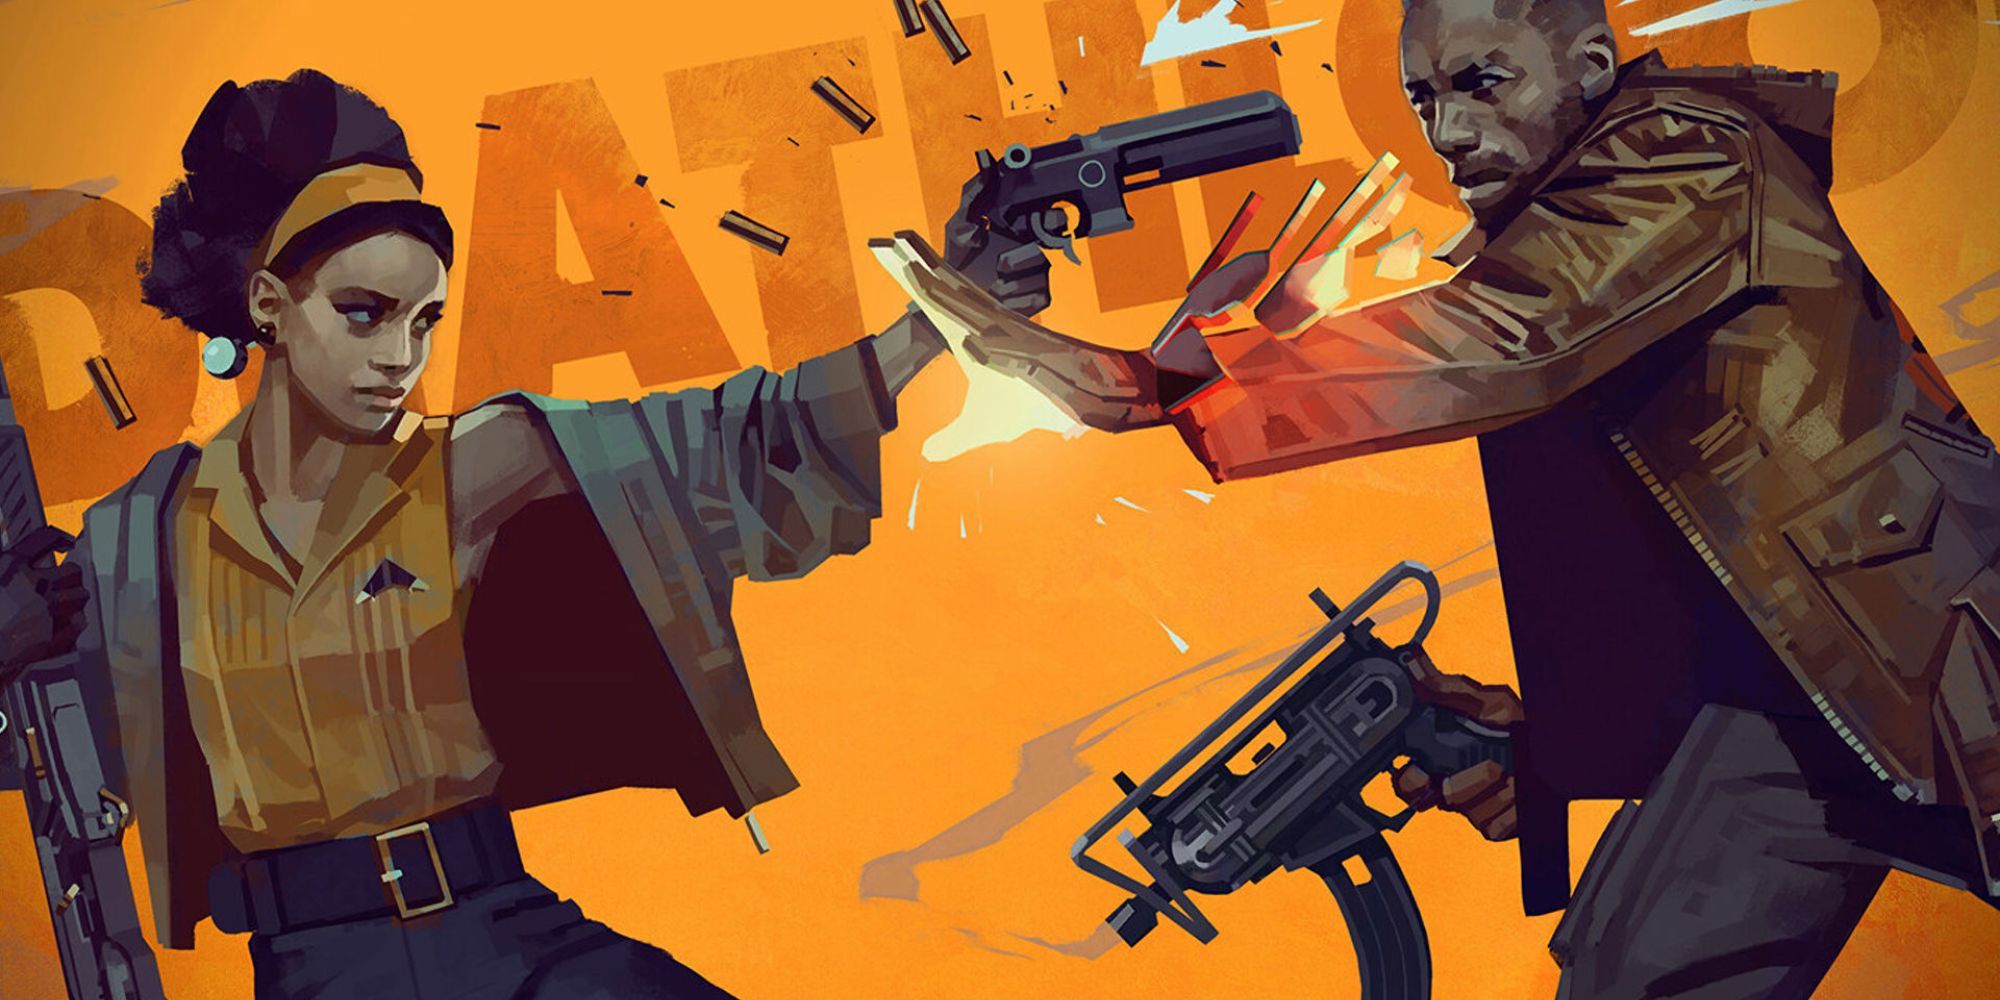 The poster for the video game Deathloop showing the characters Colt and Julianna engaged in a gunfight